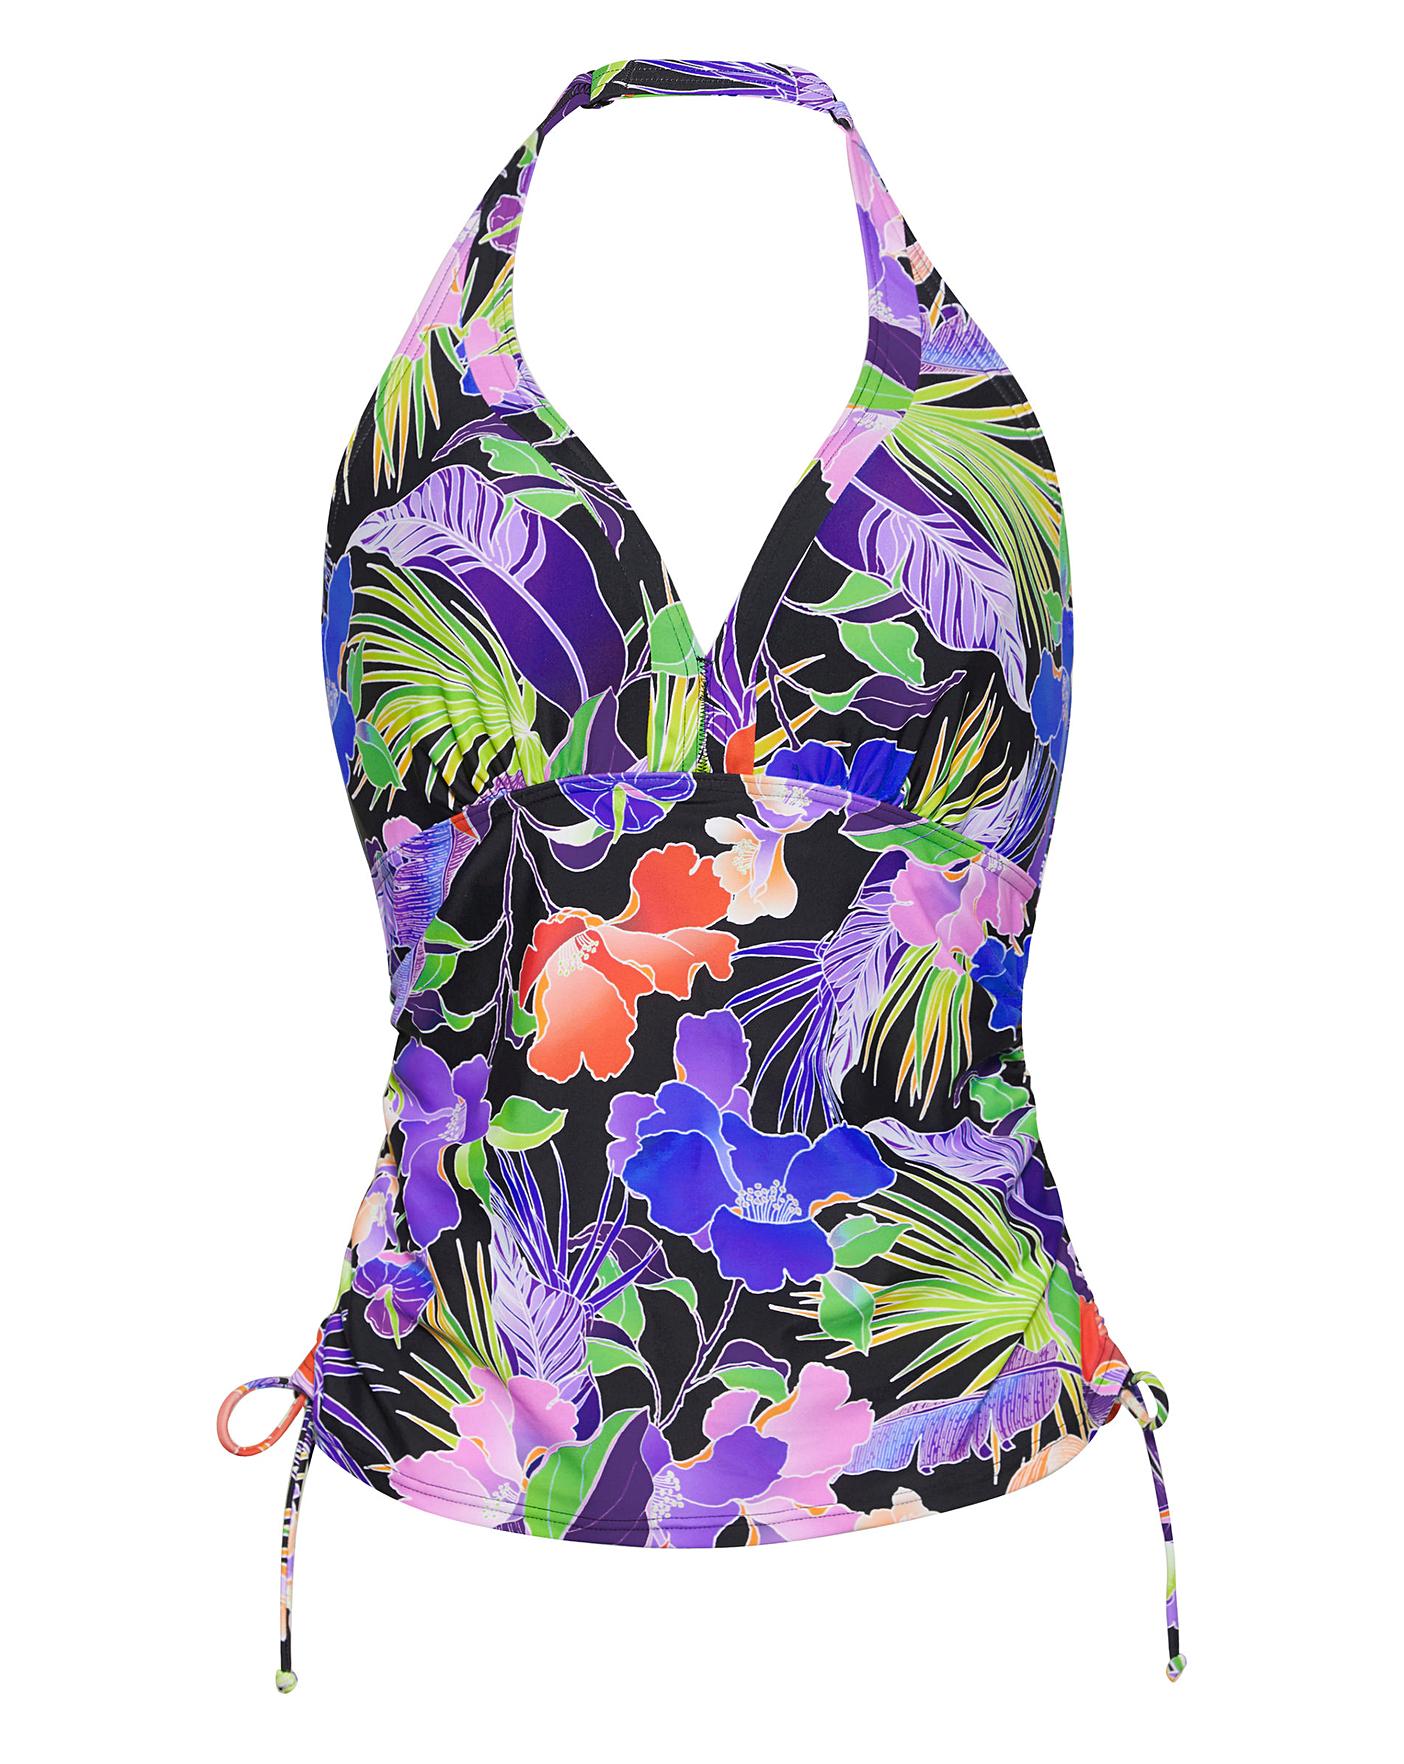 Figleaves womens one piece swimsuit. Neck and halter style. Underwire 38DD